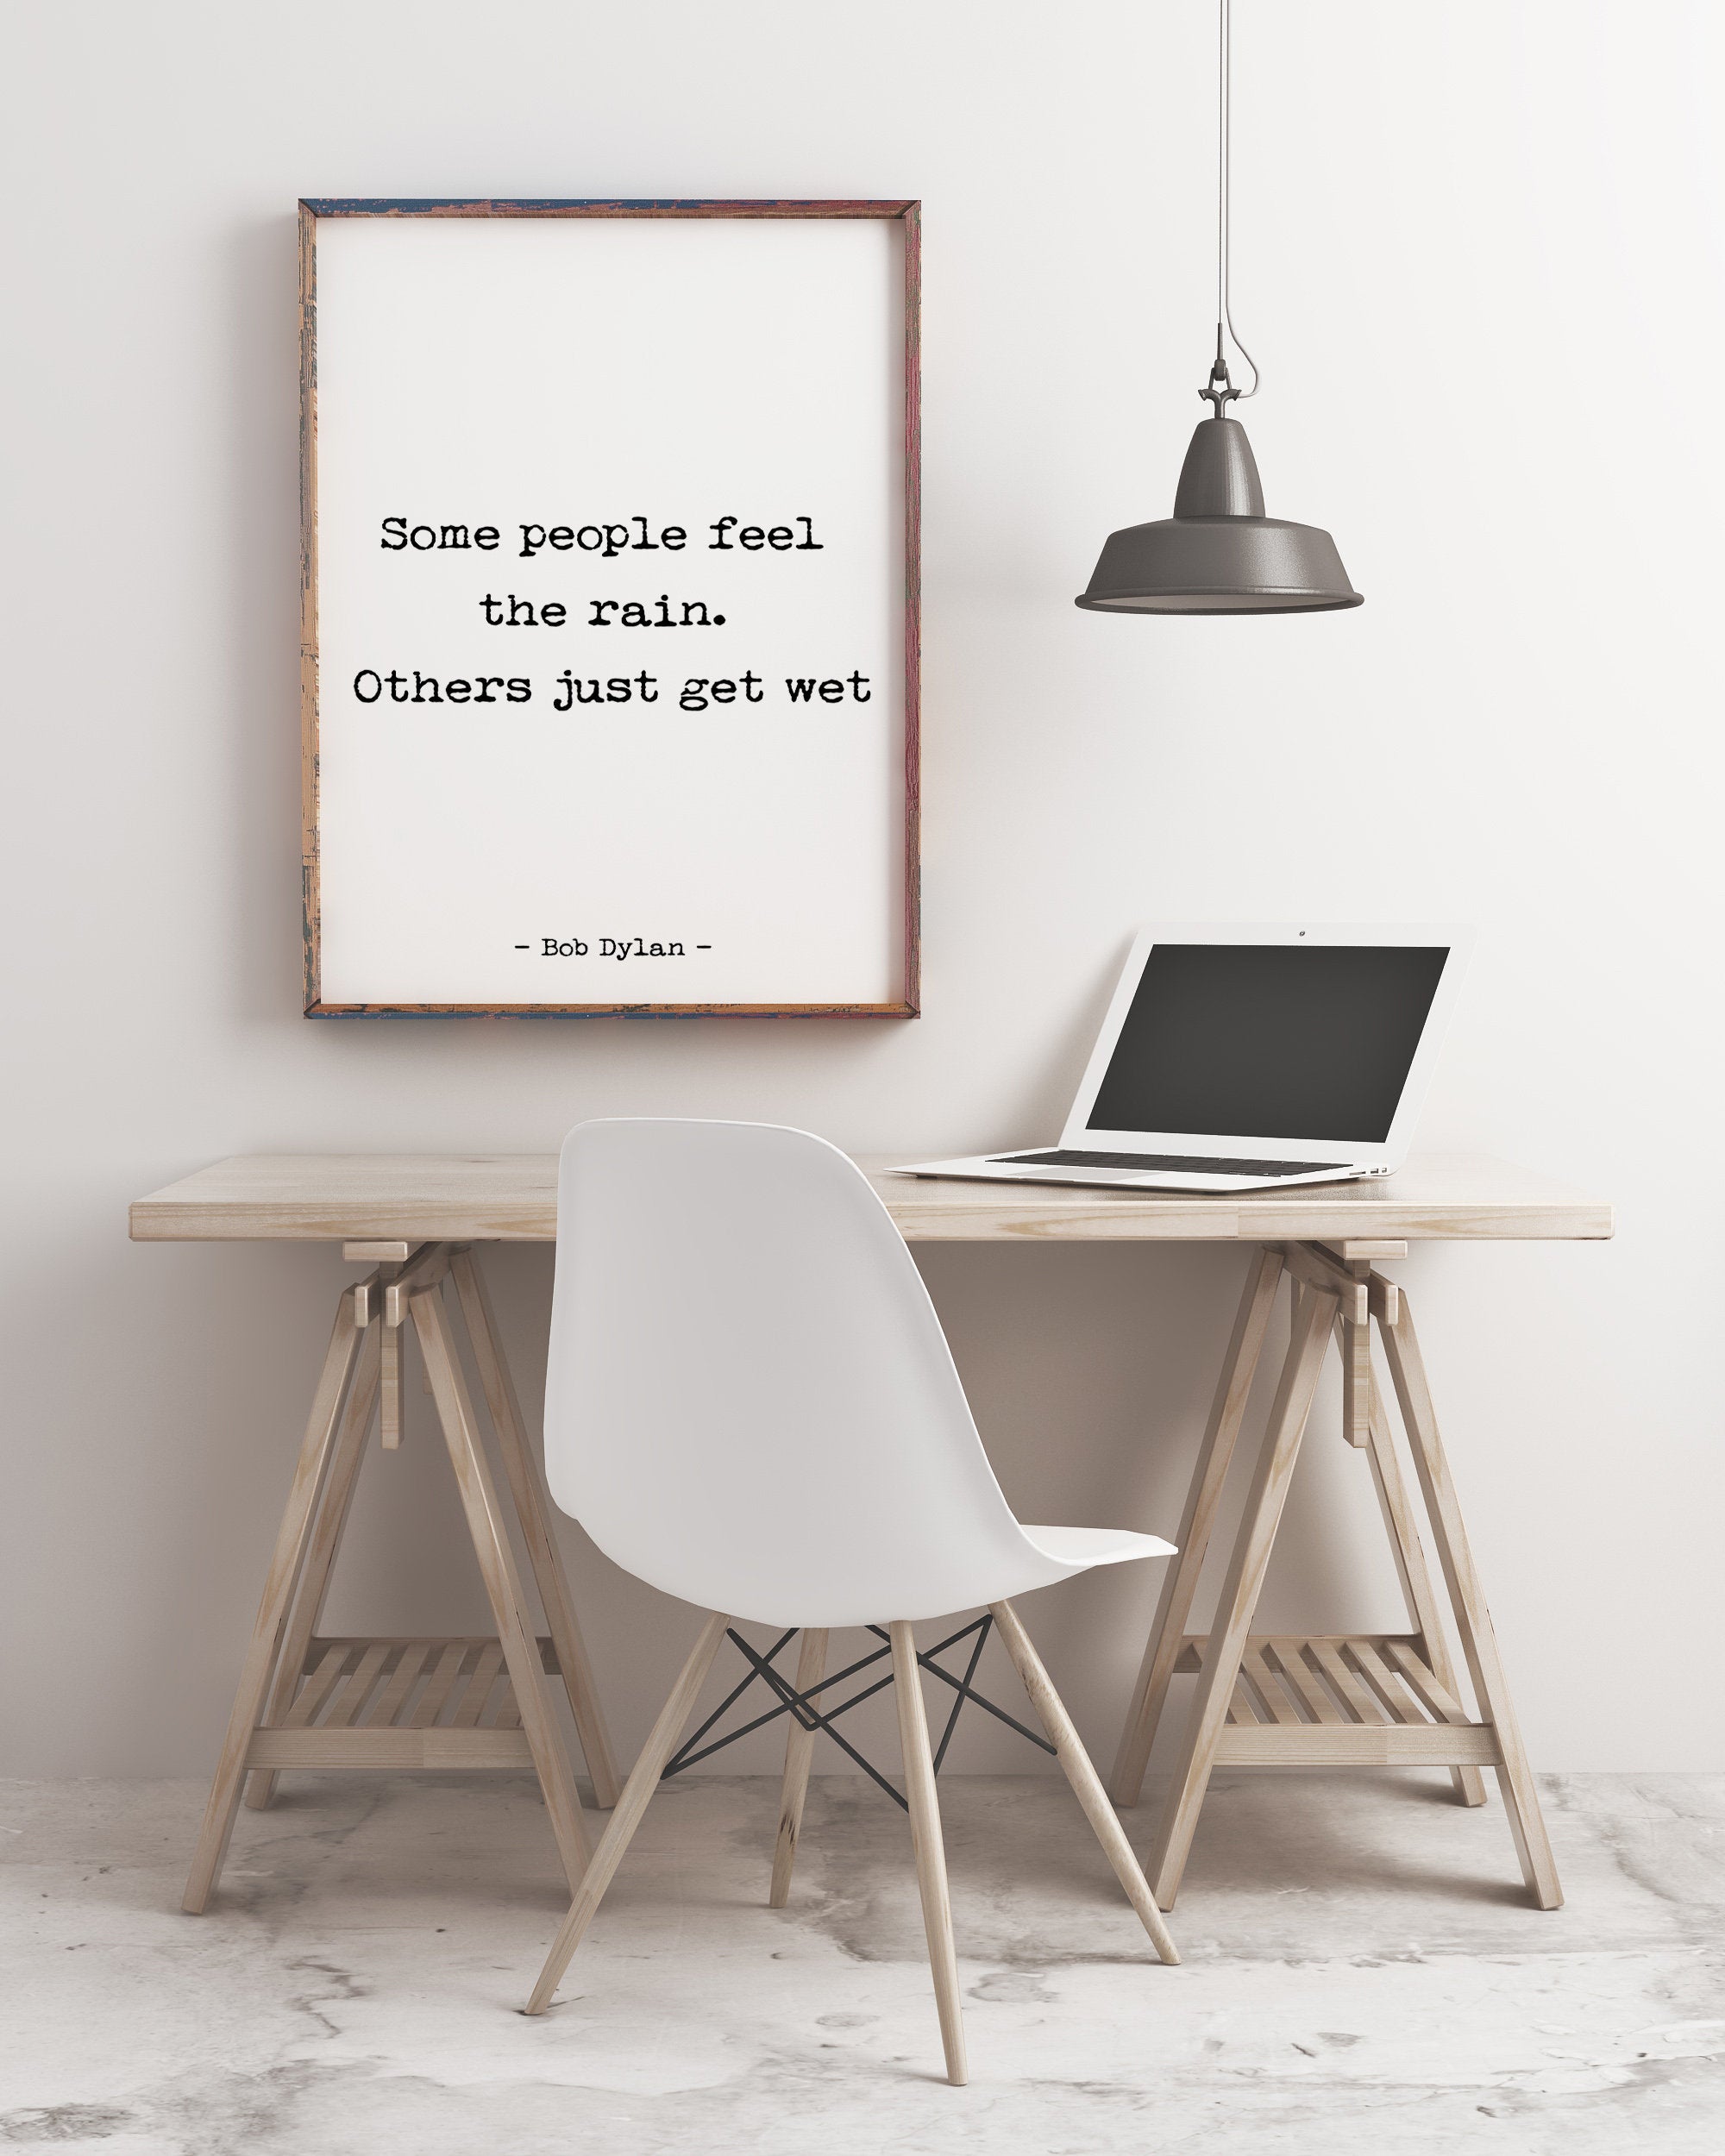 Bob Dylan Quote Print, Some people feel the rain. Others just get wet. Motivational print